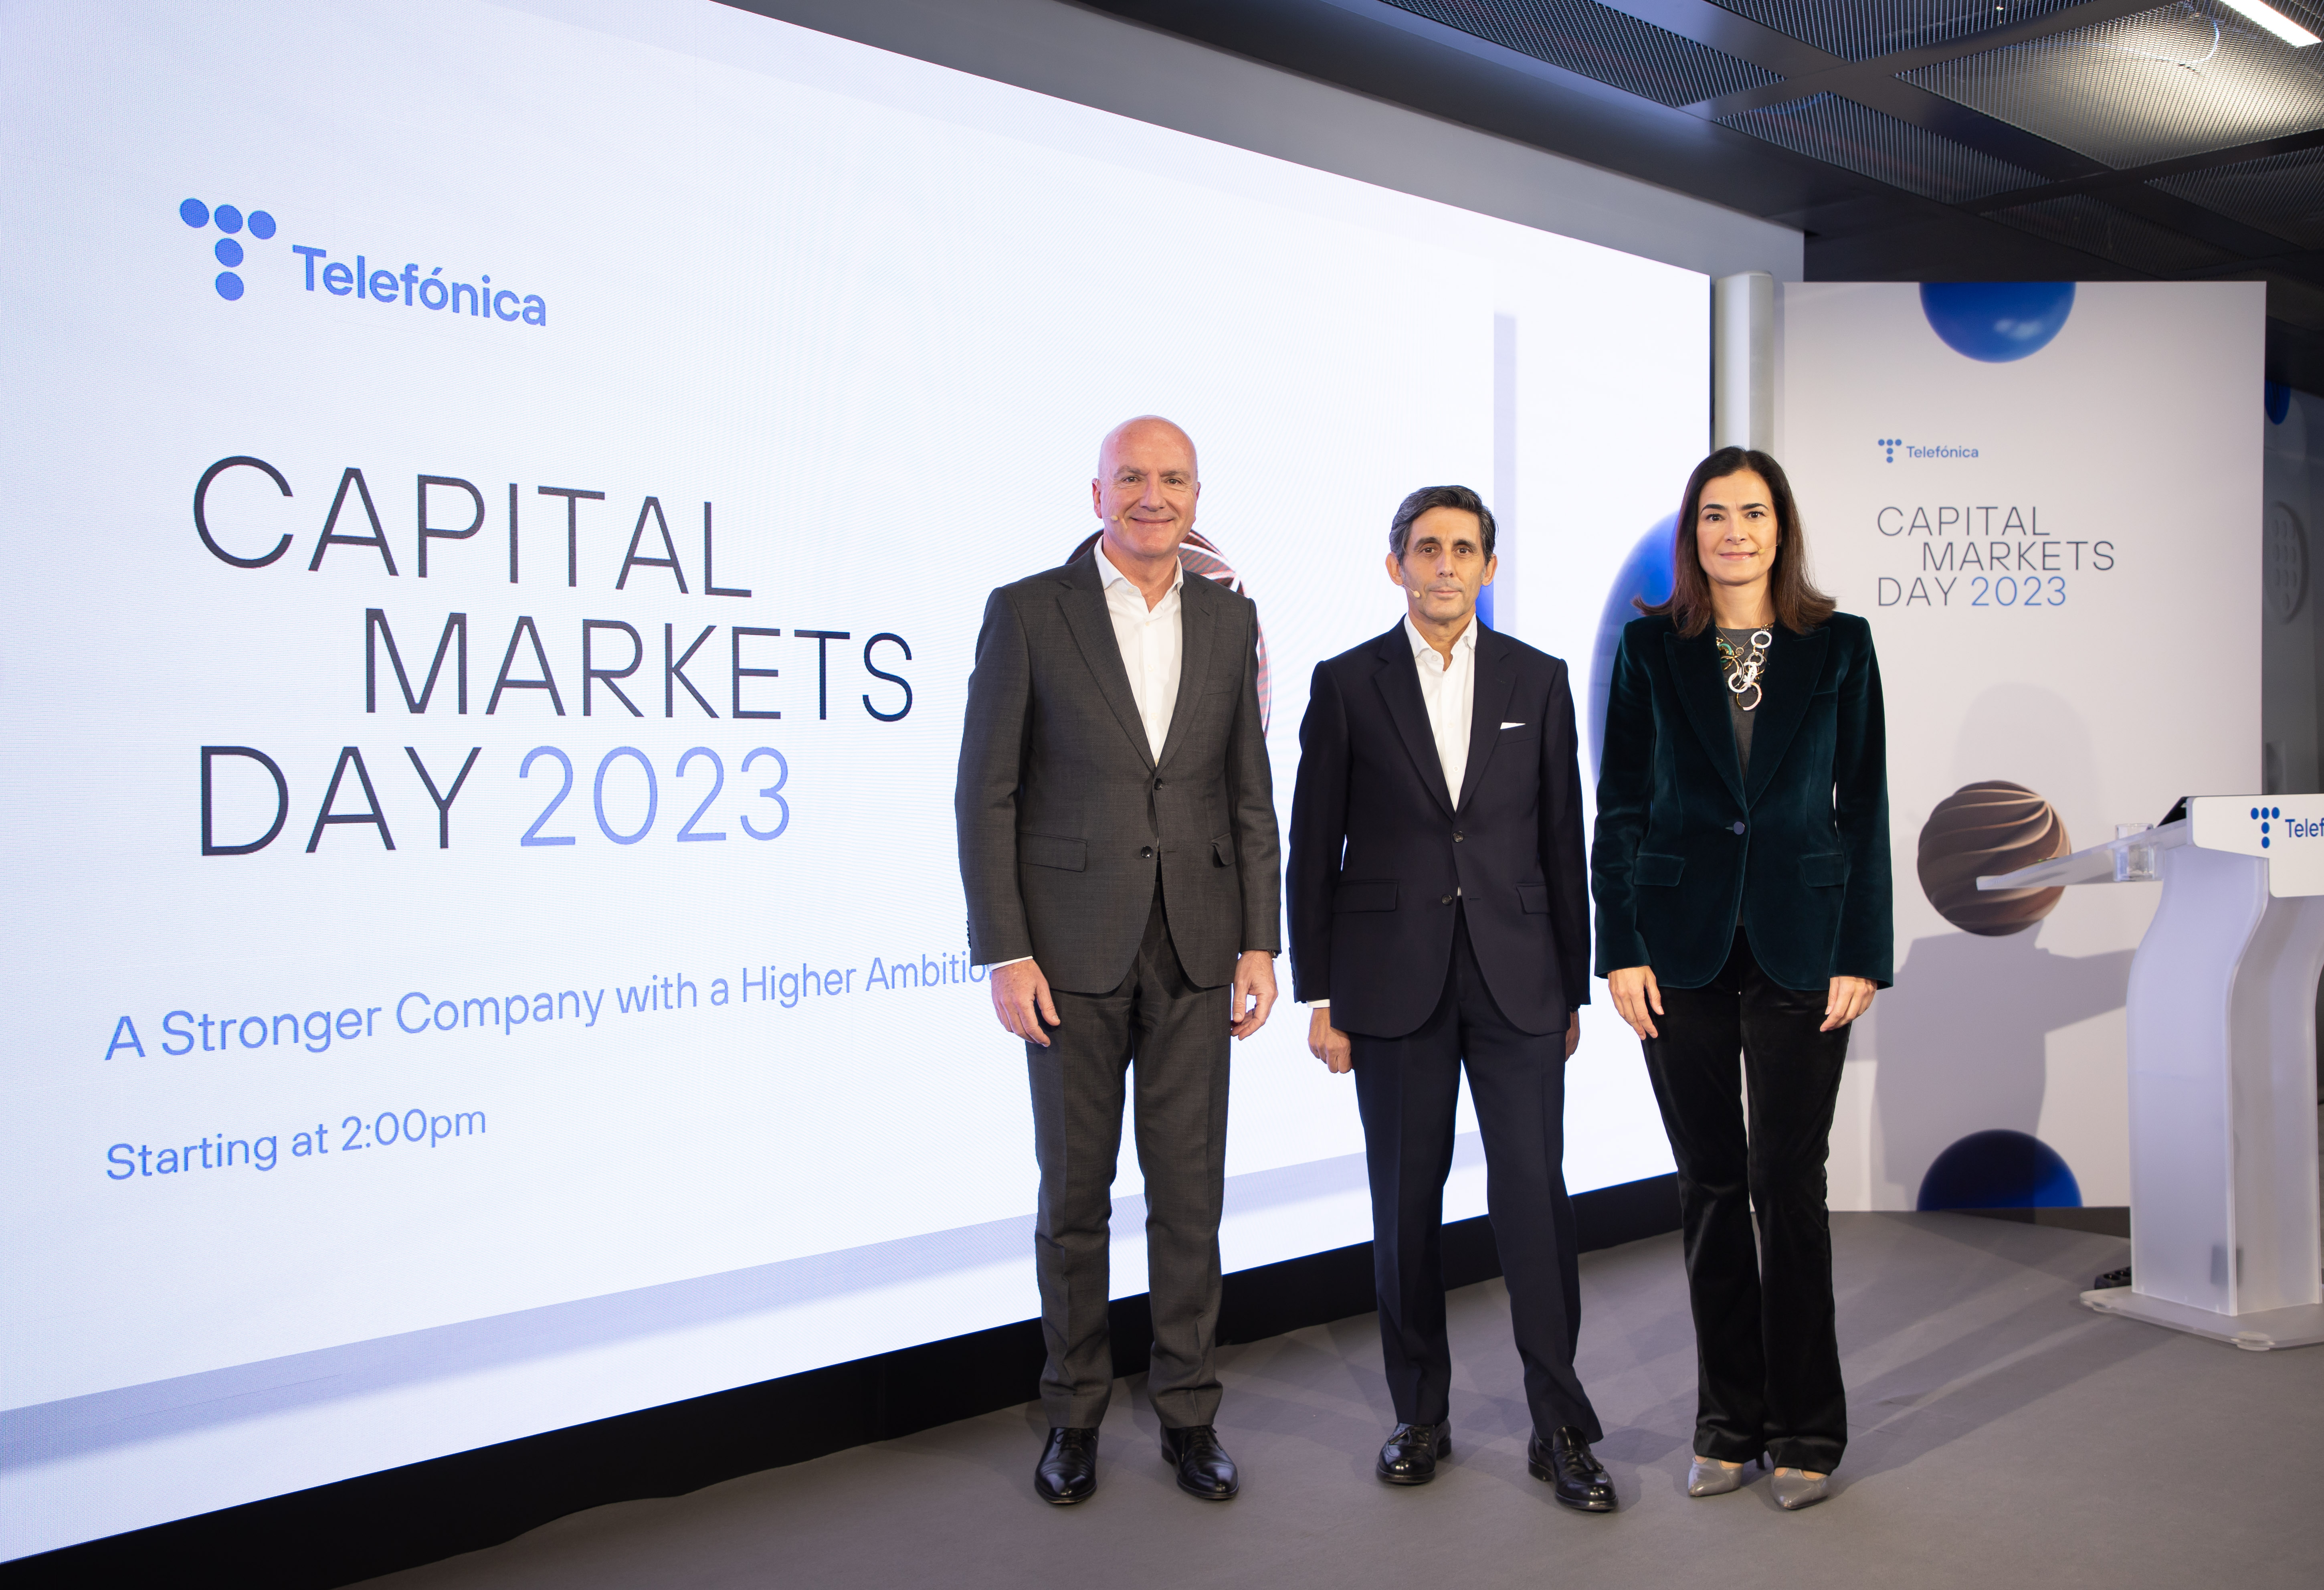 José María Álvarez-Pallete, Chairman & CEO, Telefónica S.A., in the centre, accompanied by Ángel Vilá, Chief Operating Officer (COO) of Telefónica S.A. on his left, and Laura Abasolo, Chief Financial and Control Officer & Head of T. Hispam, at the Capital Markets Day 2023.